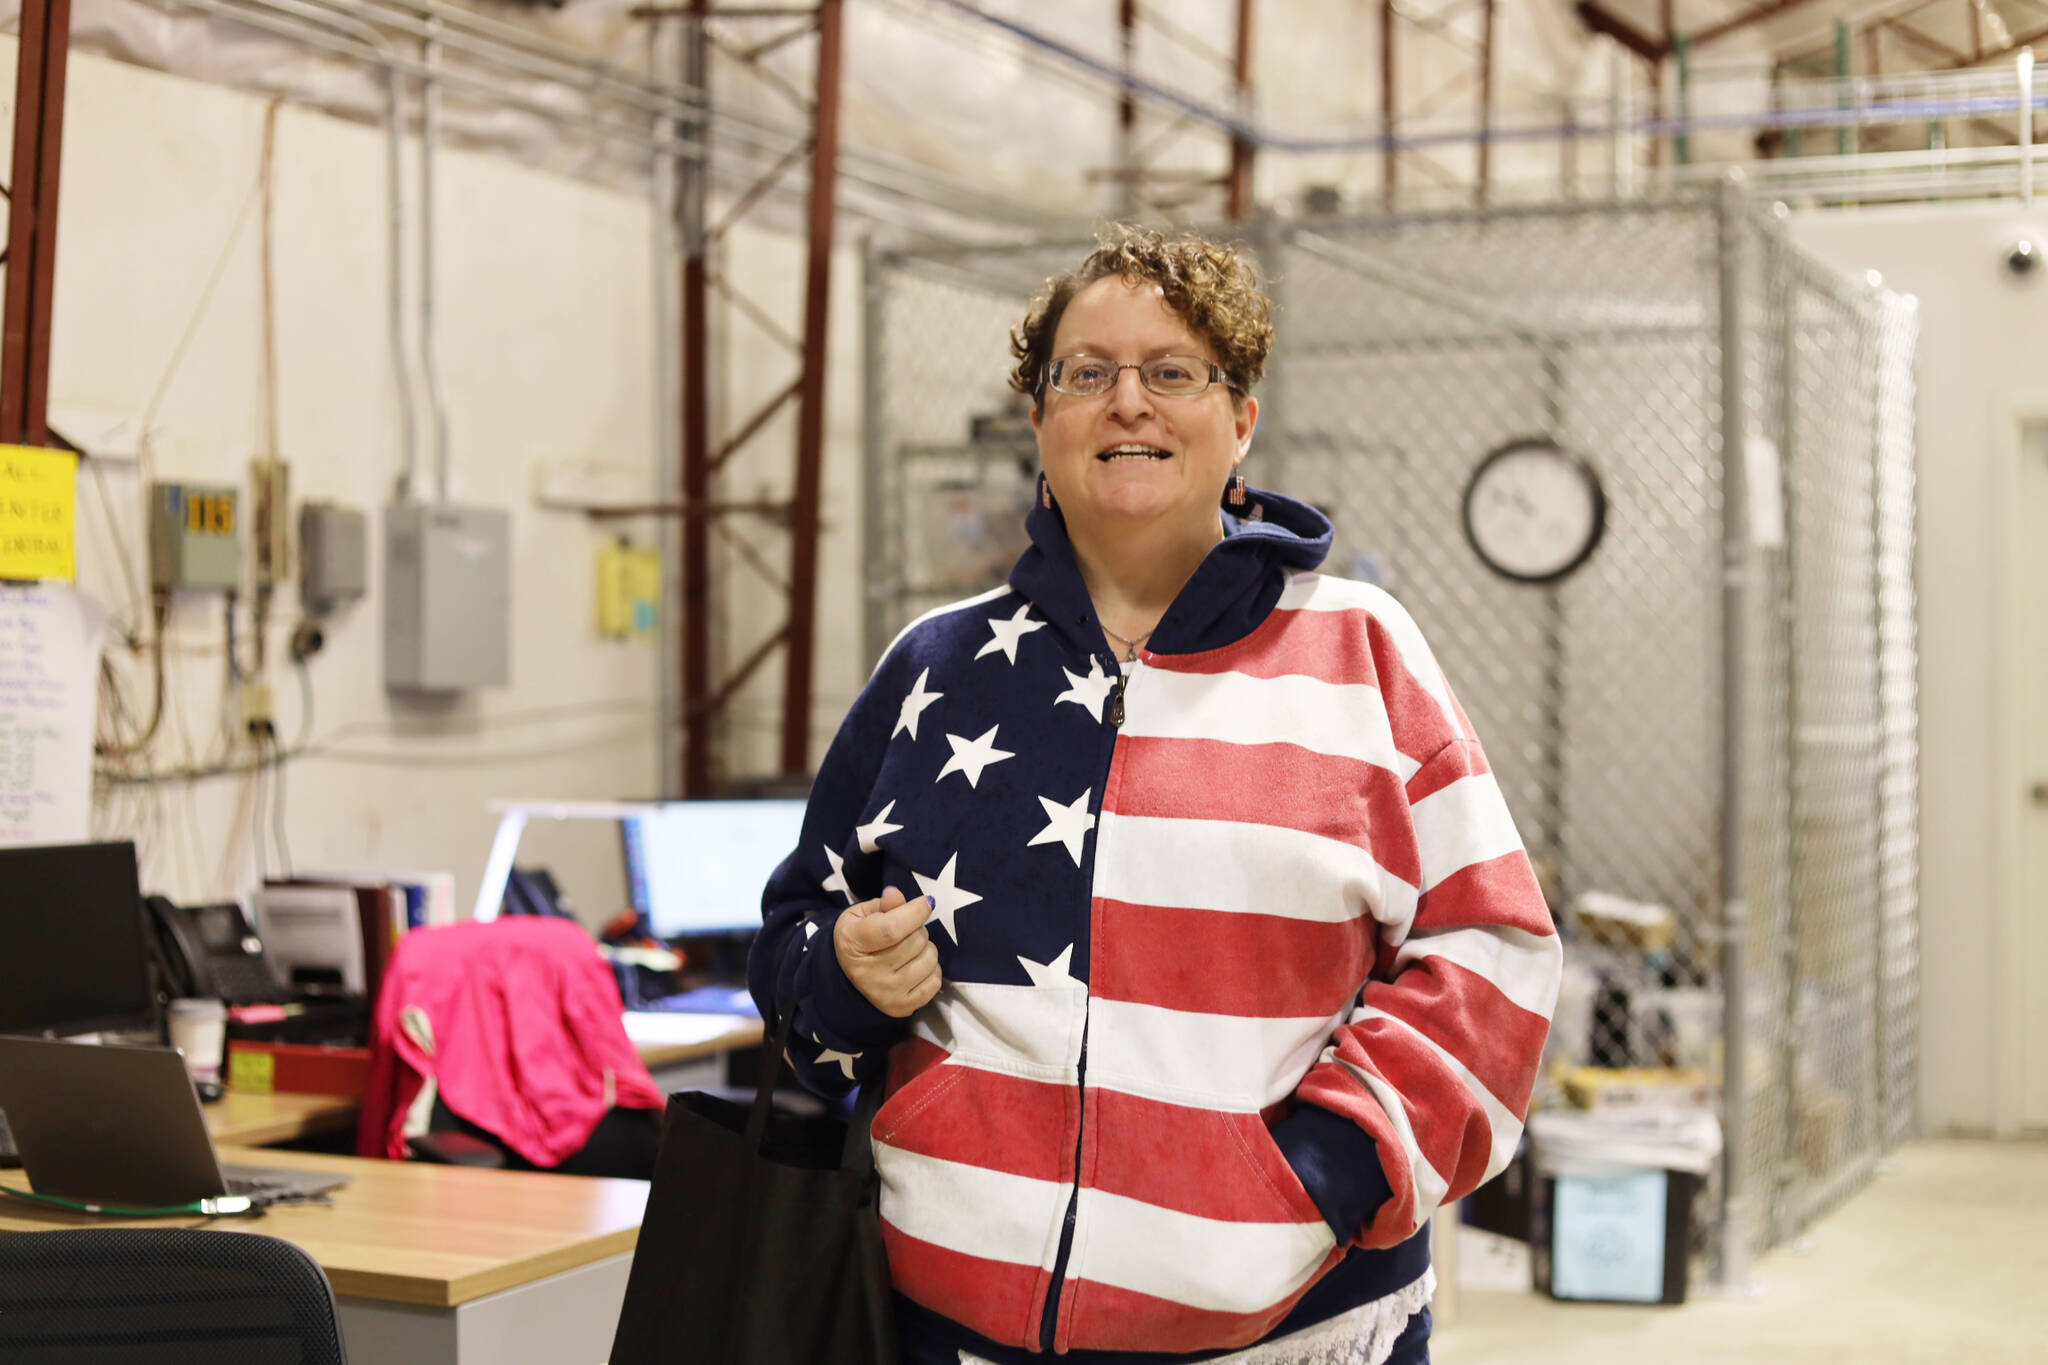 City and Borough of Juneau Clerk Beth McEwen shows off her Election Day attire after returning from the rain outside at the CBJ ballot processing center Tuesday morning. (Clarise Larson / Juneau Empire)